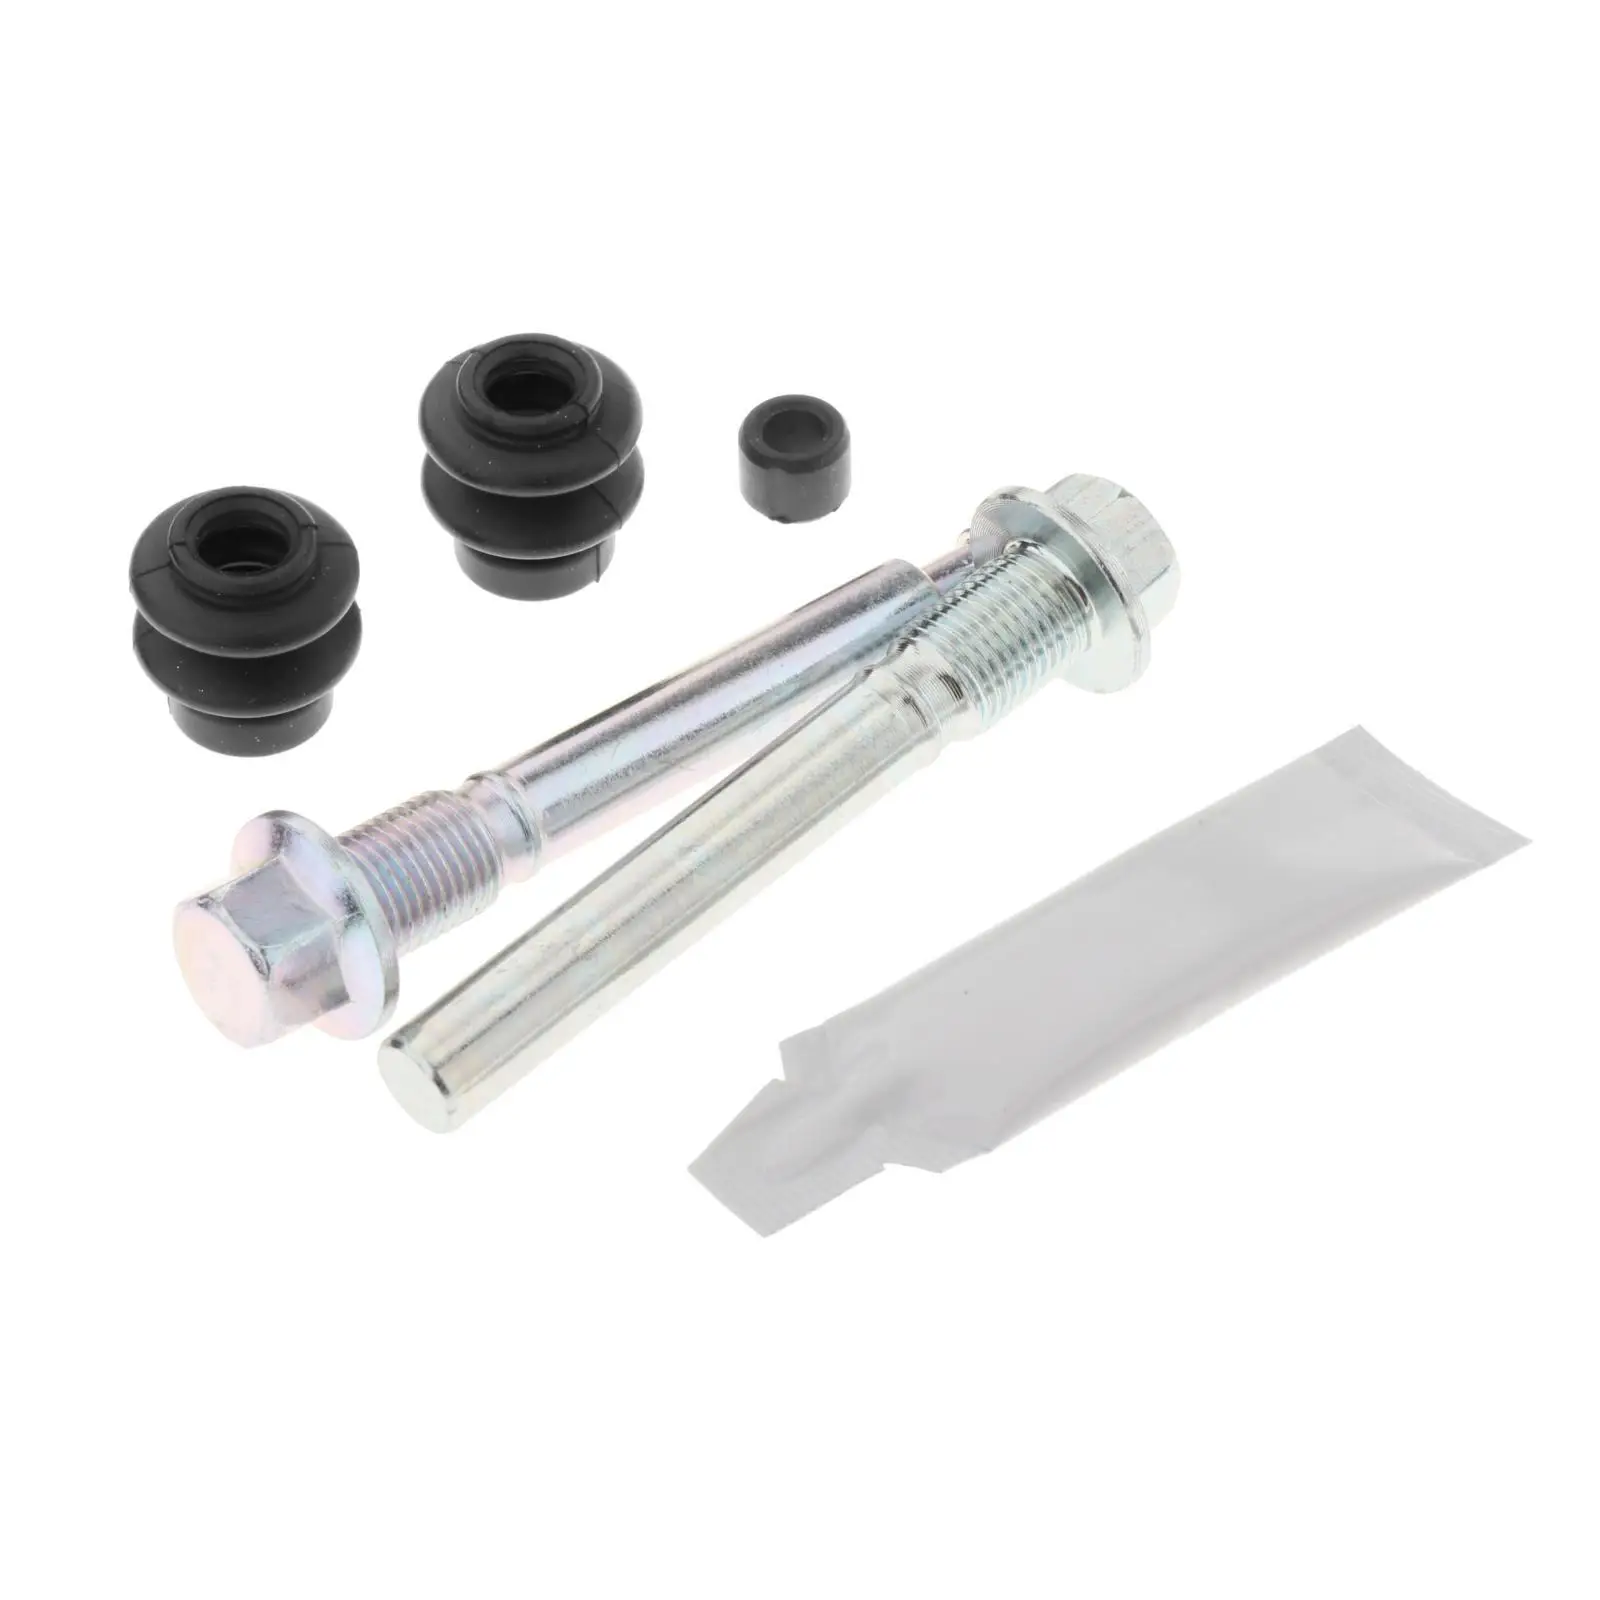 Rear Brake caliper Slider Pins Guide  Kit Bcf1402A  Kit  02-12 GG Gy GH Made of high reliable quality and durable material